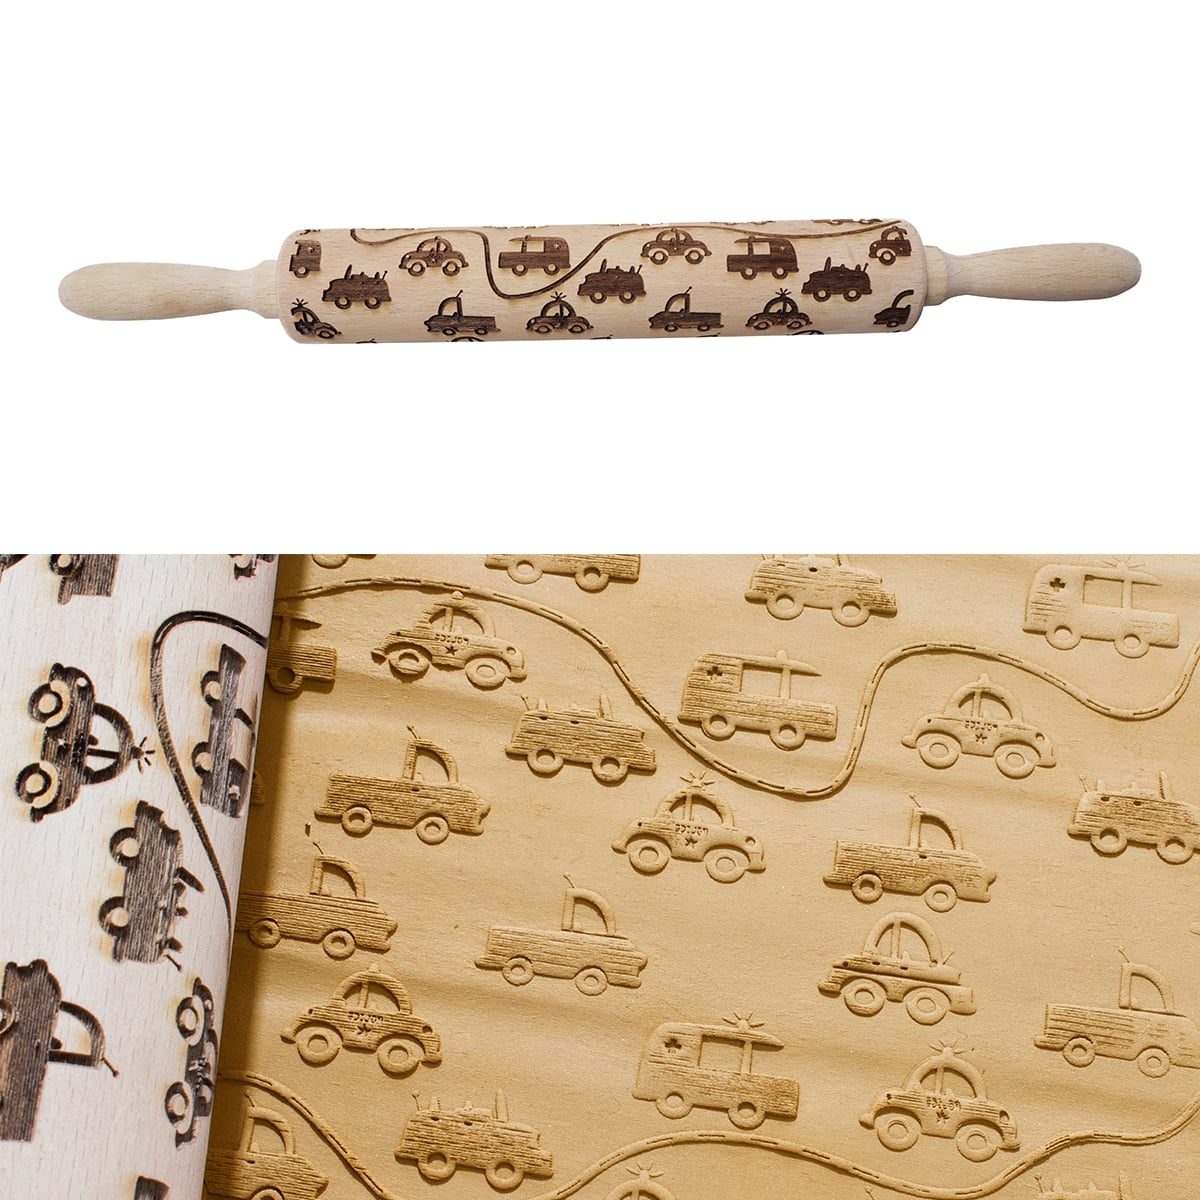 Christmas Wooden Rolling Pins Engraved Embossing Rolling Pin with Christmas Themed Symbols for Baking